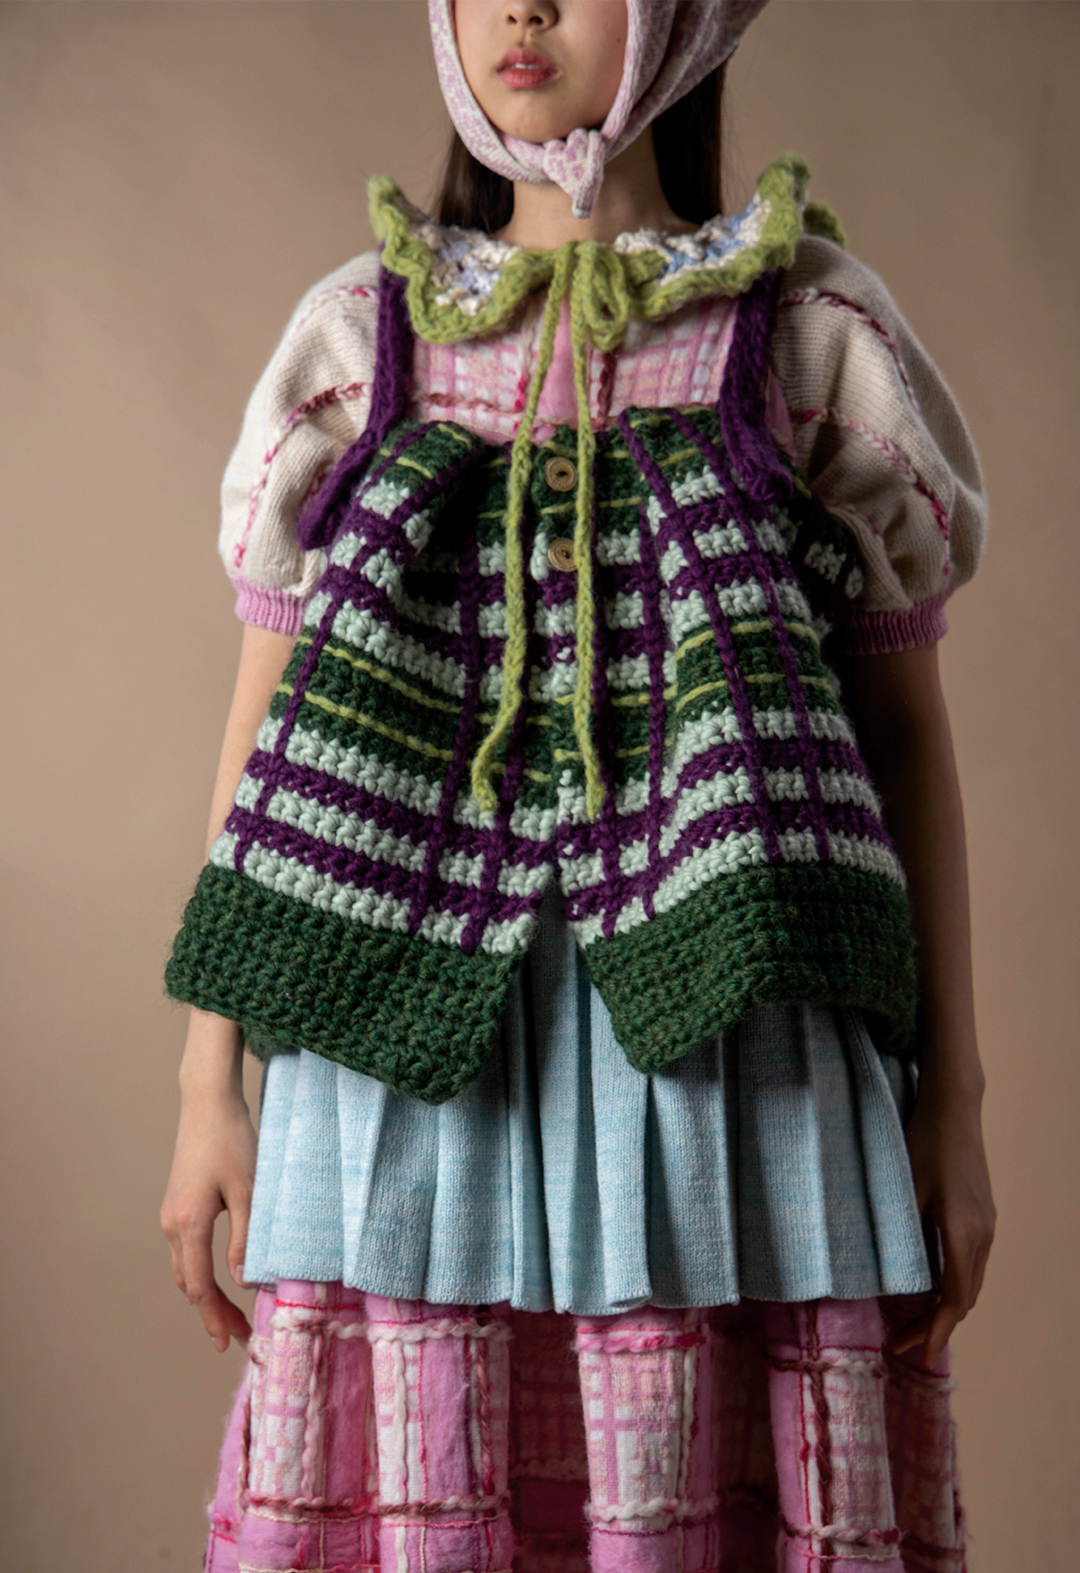 A close-up shot of the model wearing five layers of knitted garments: an apron top, a long dress, a pleated skirt, a collar, and a bandana on her head. 